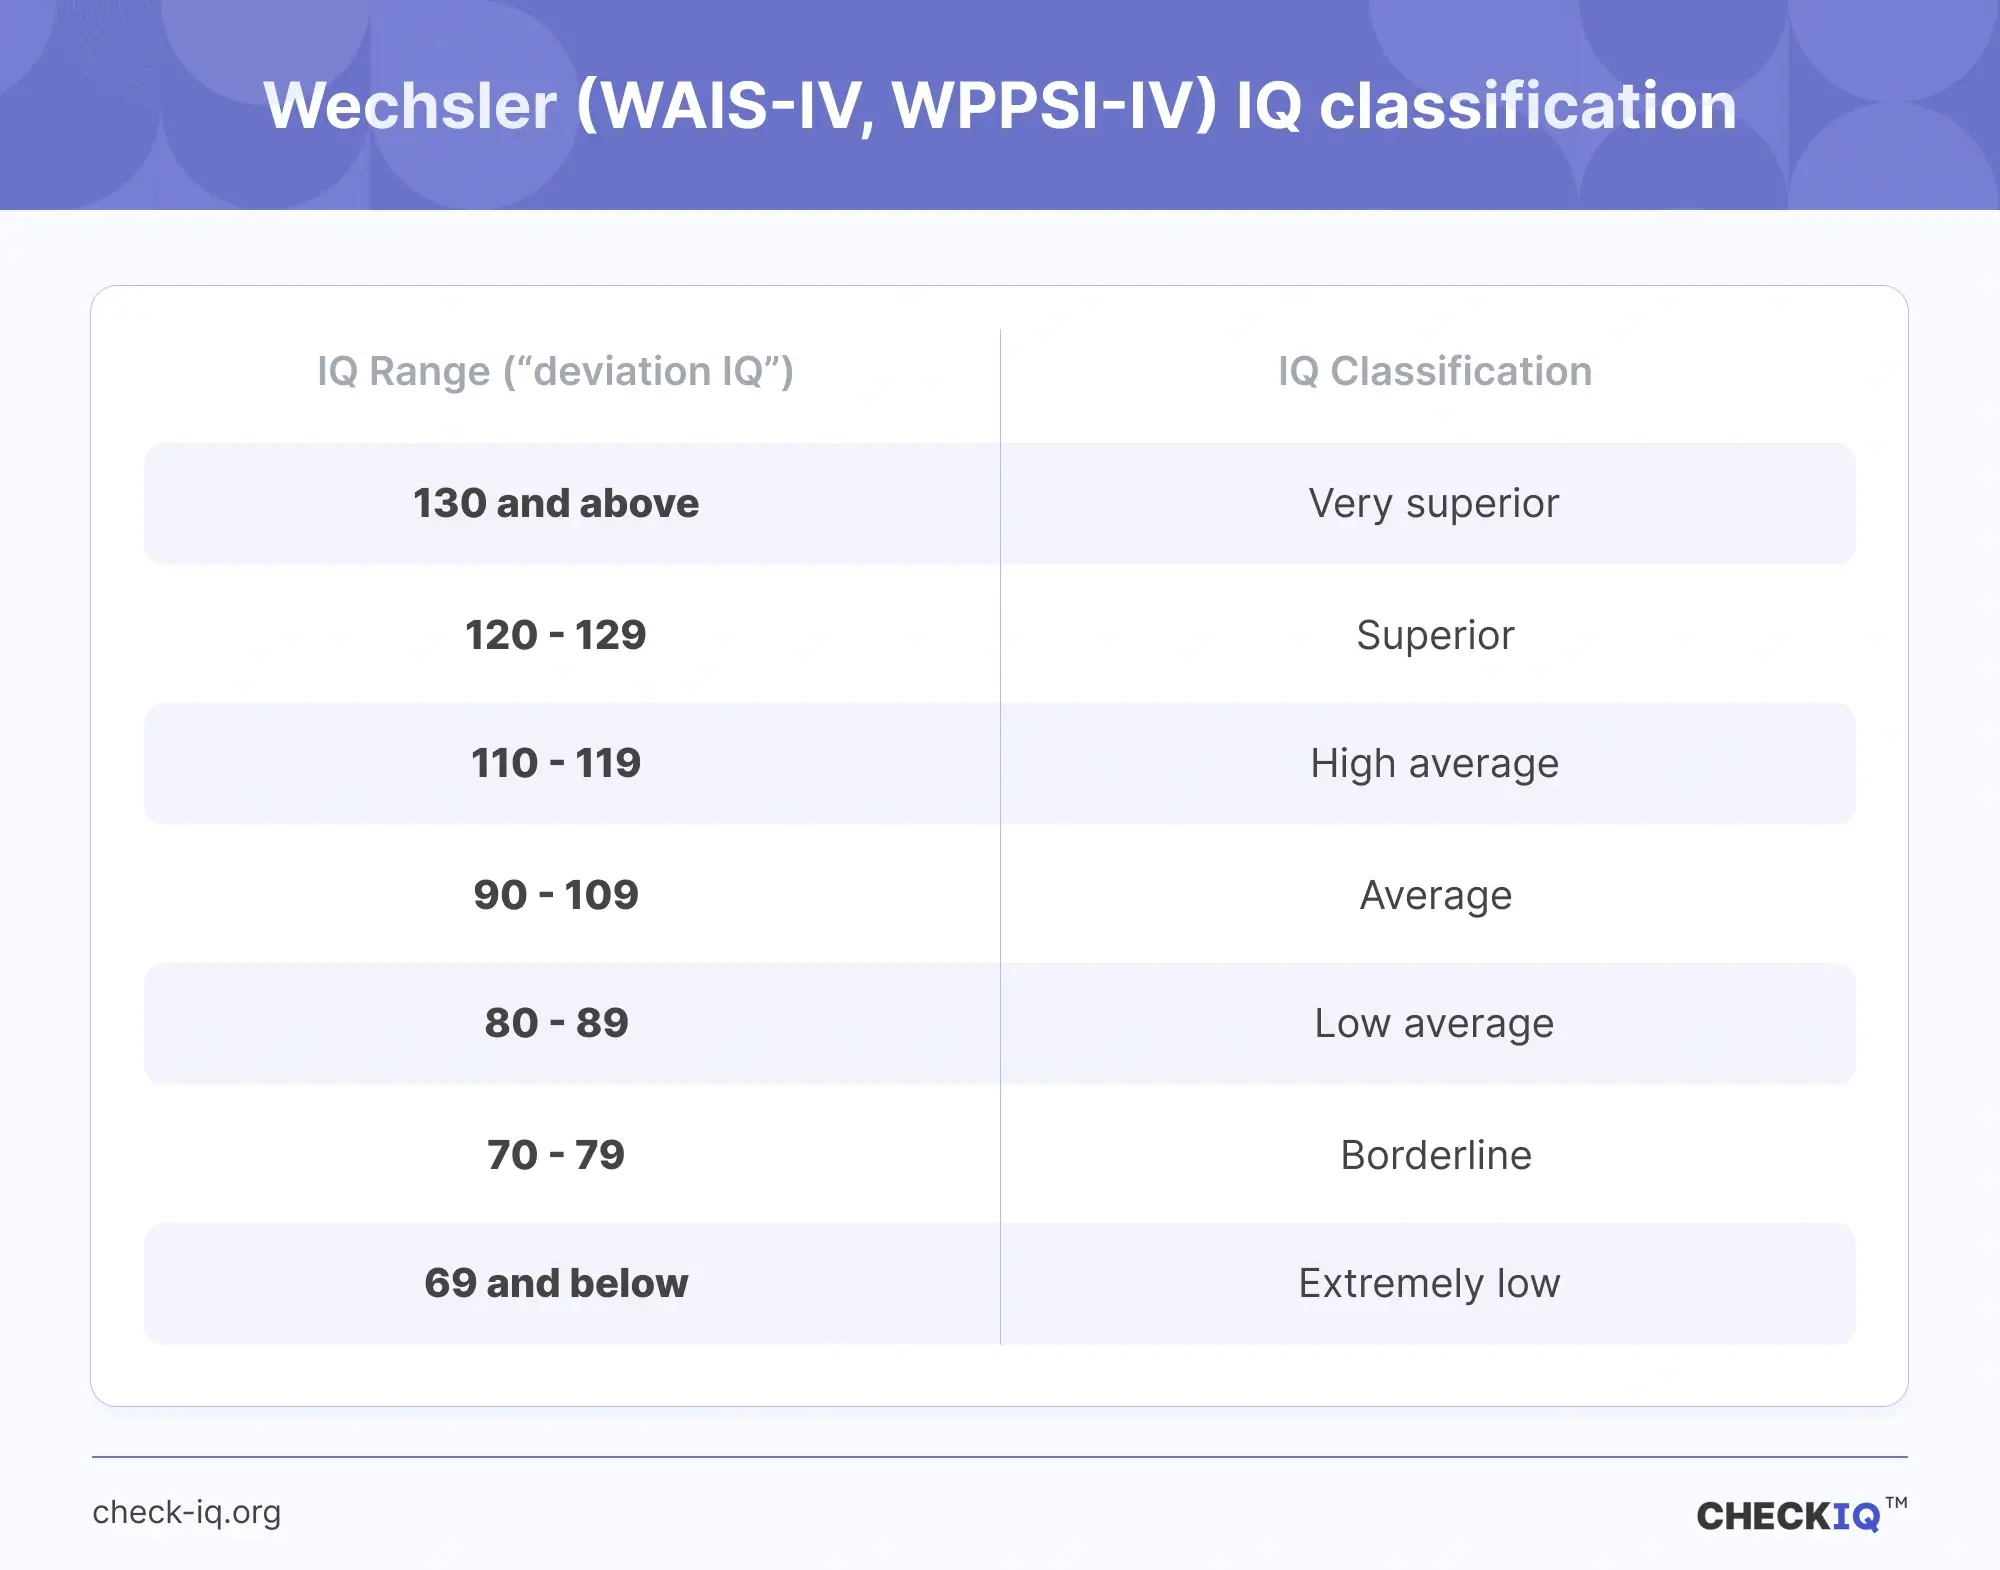 Wechsler IQ ranges with classification for WAIS-IV and WPPSI-IV